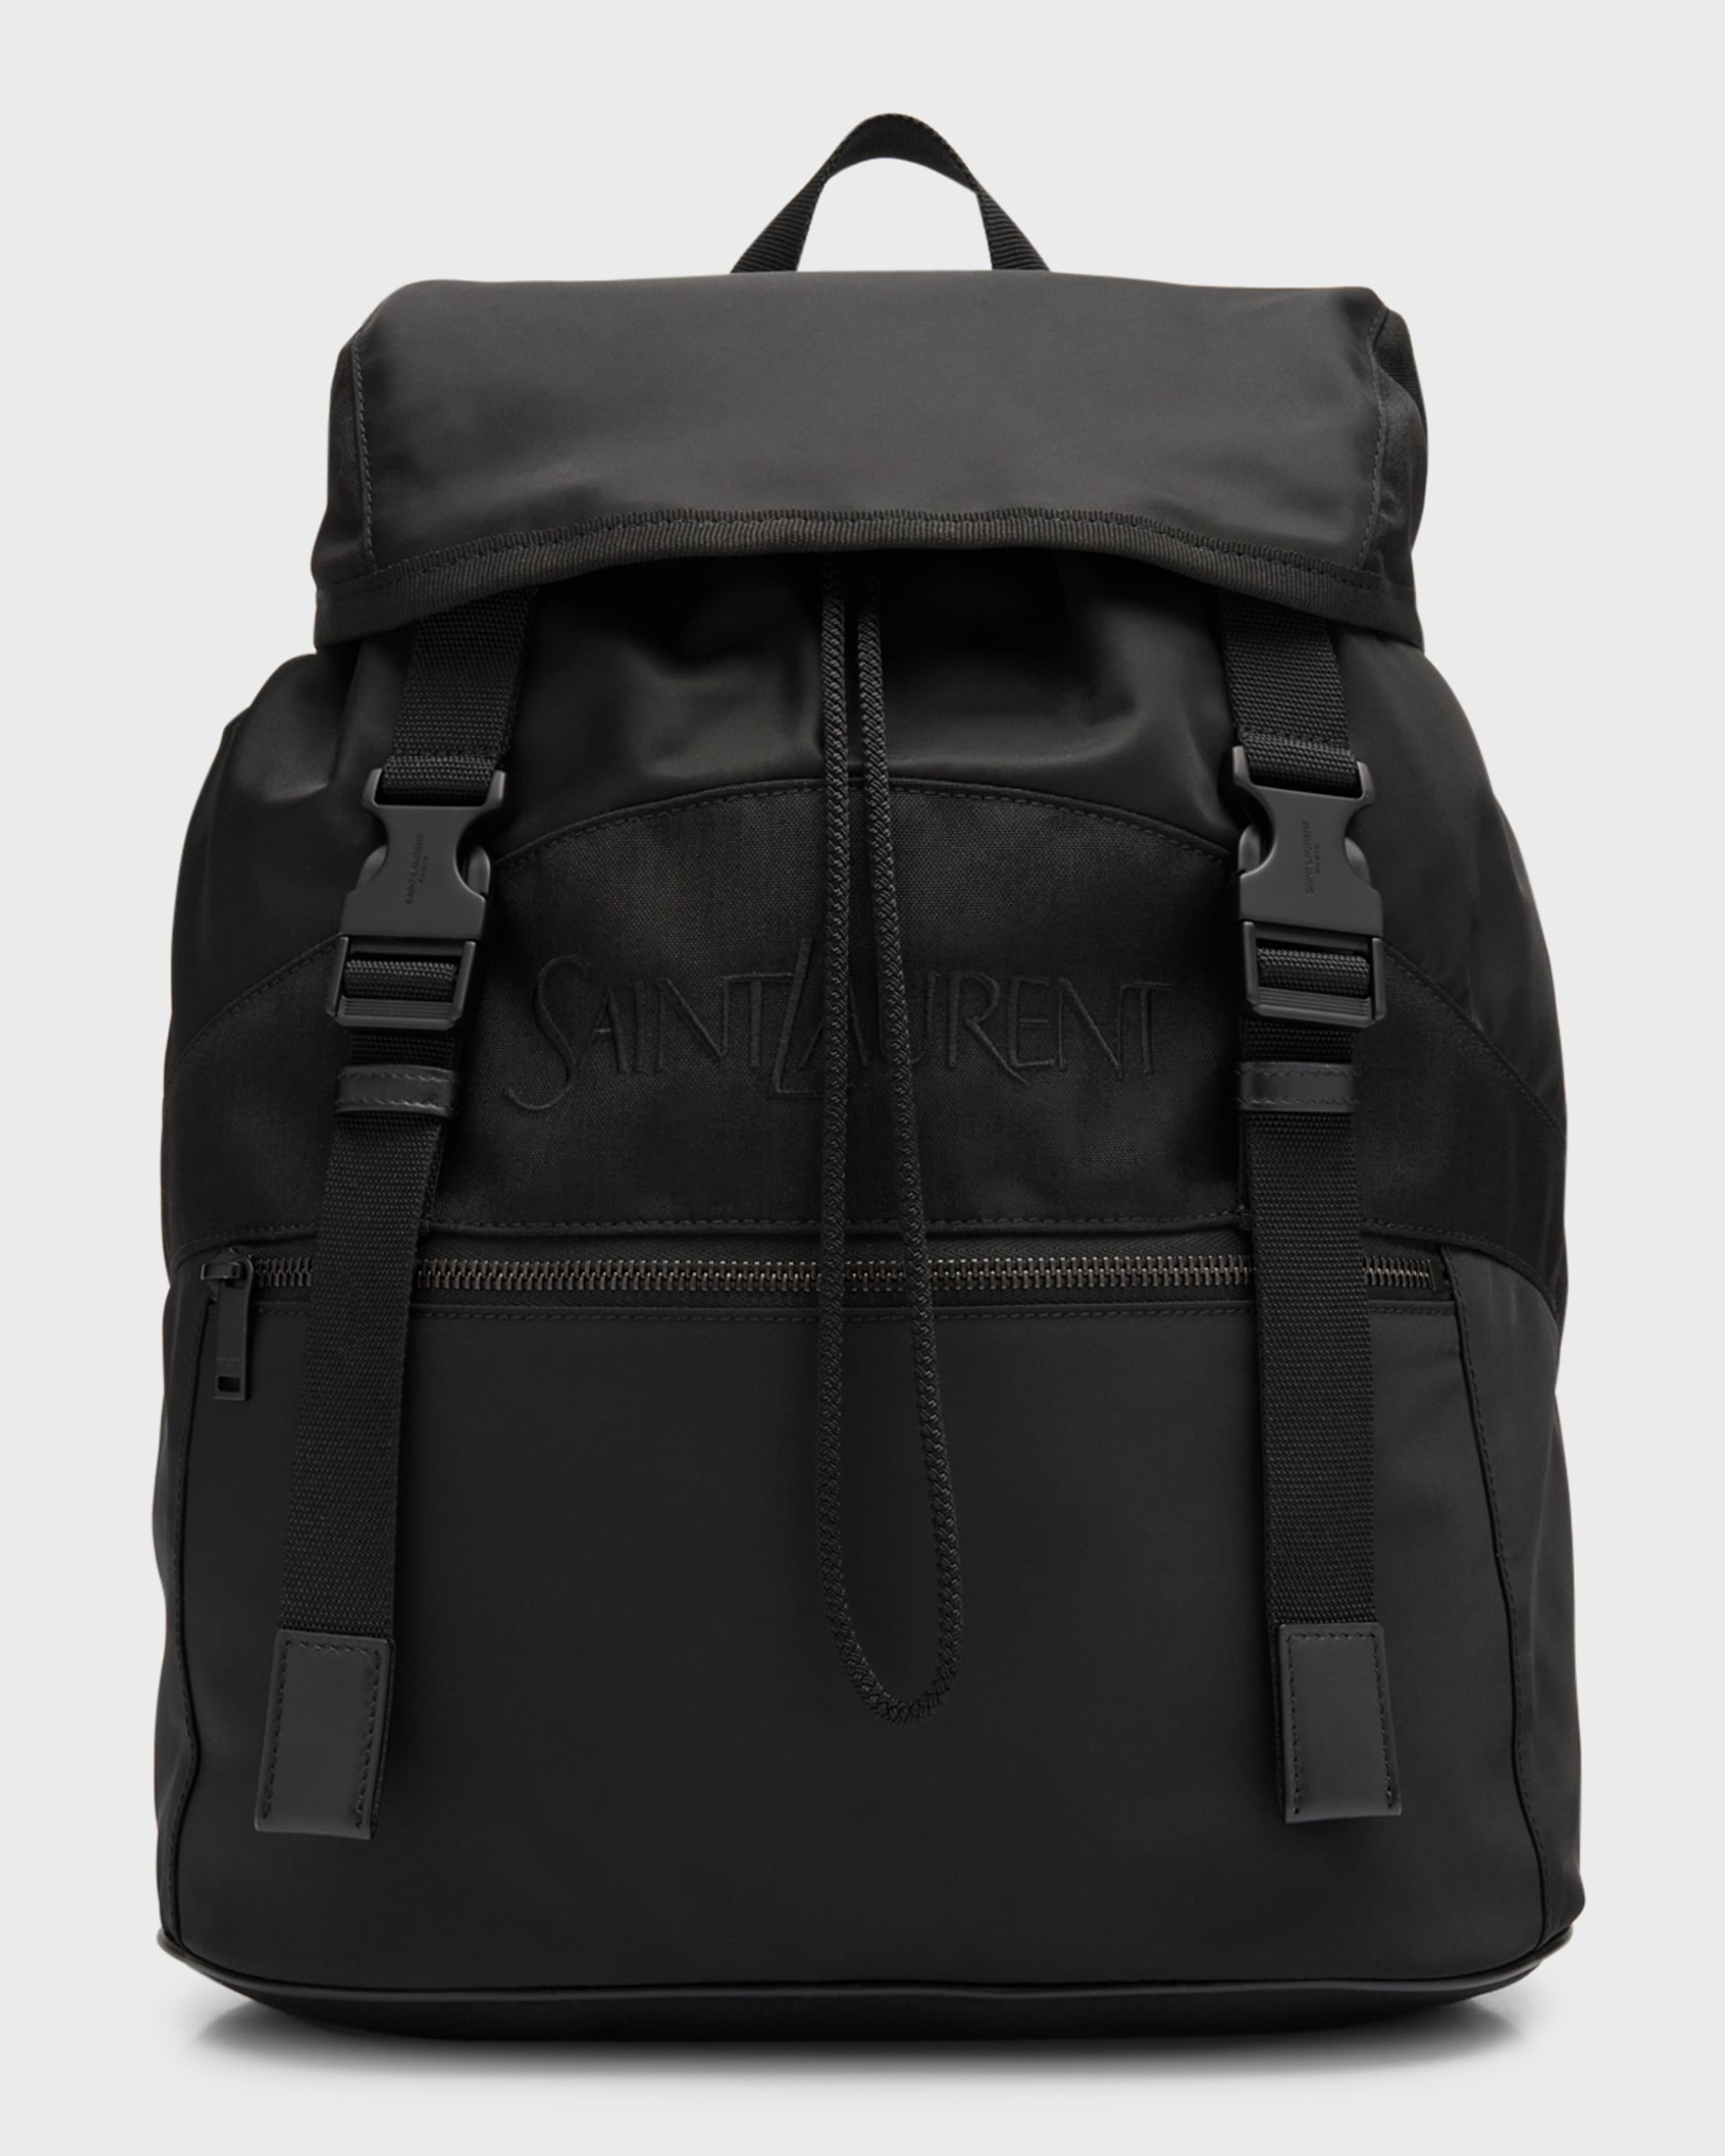 Men's Nylon and Leather Backpack - 1